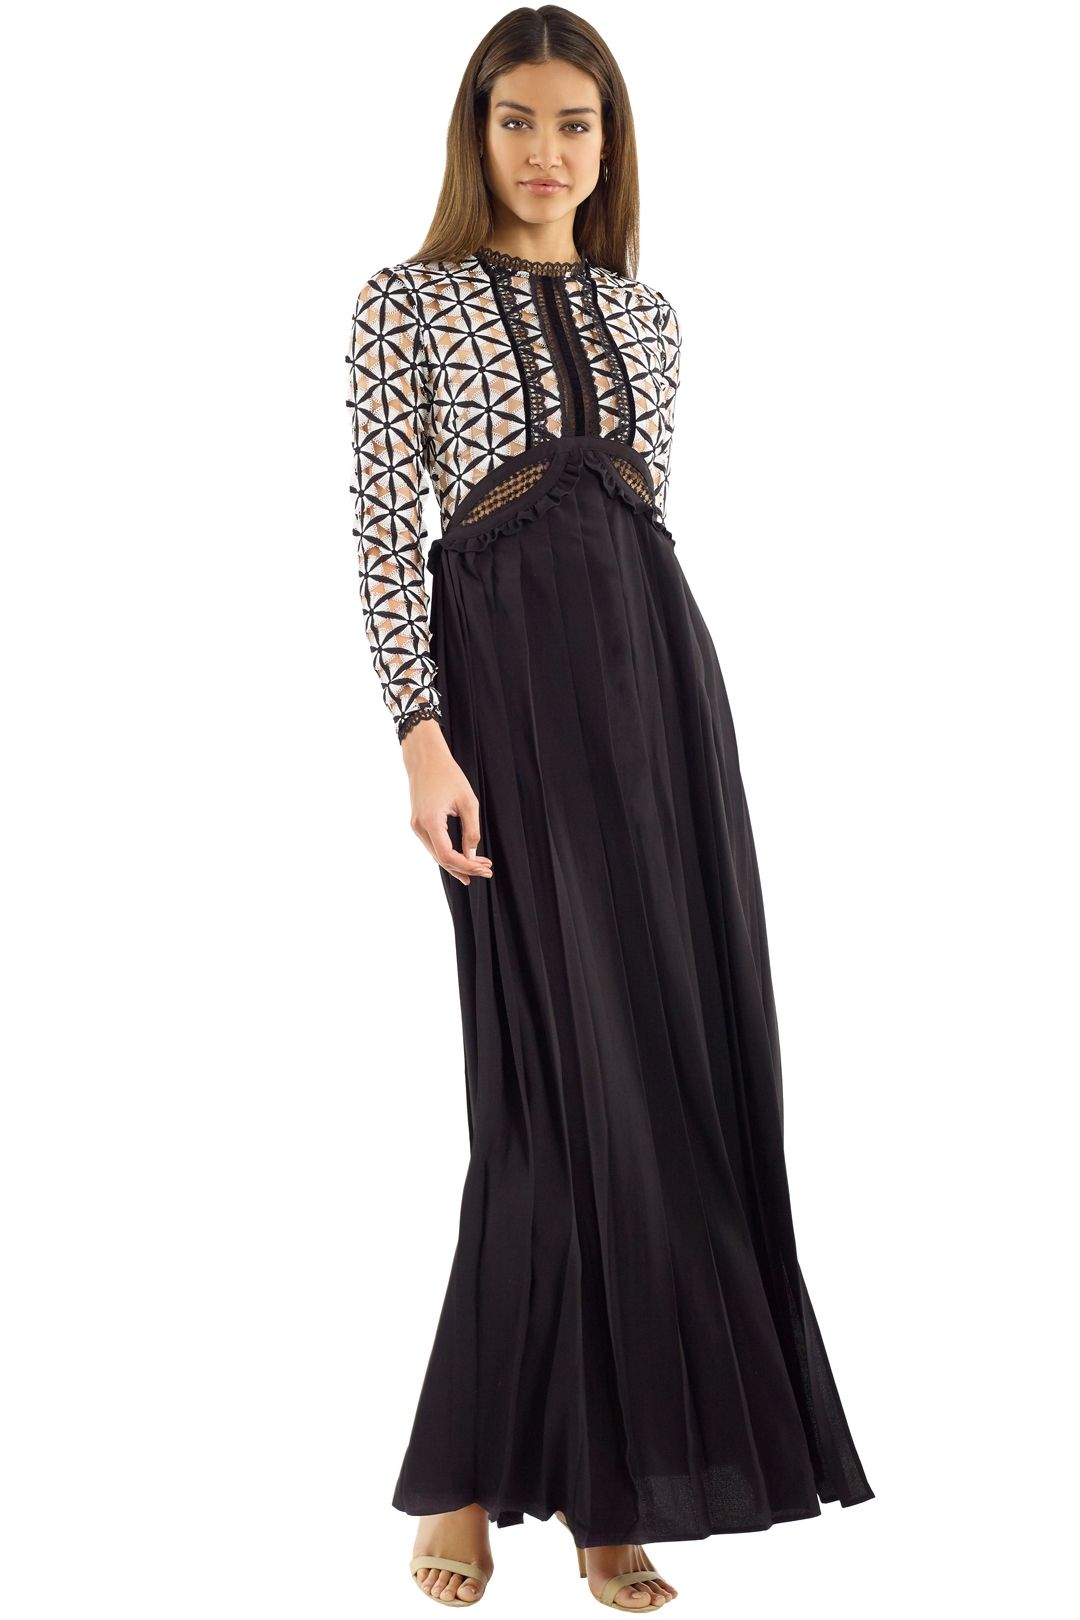 Guipure Maxi Dress by Self Portrait for Hire | GlamCorner